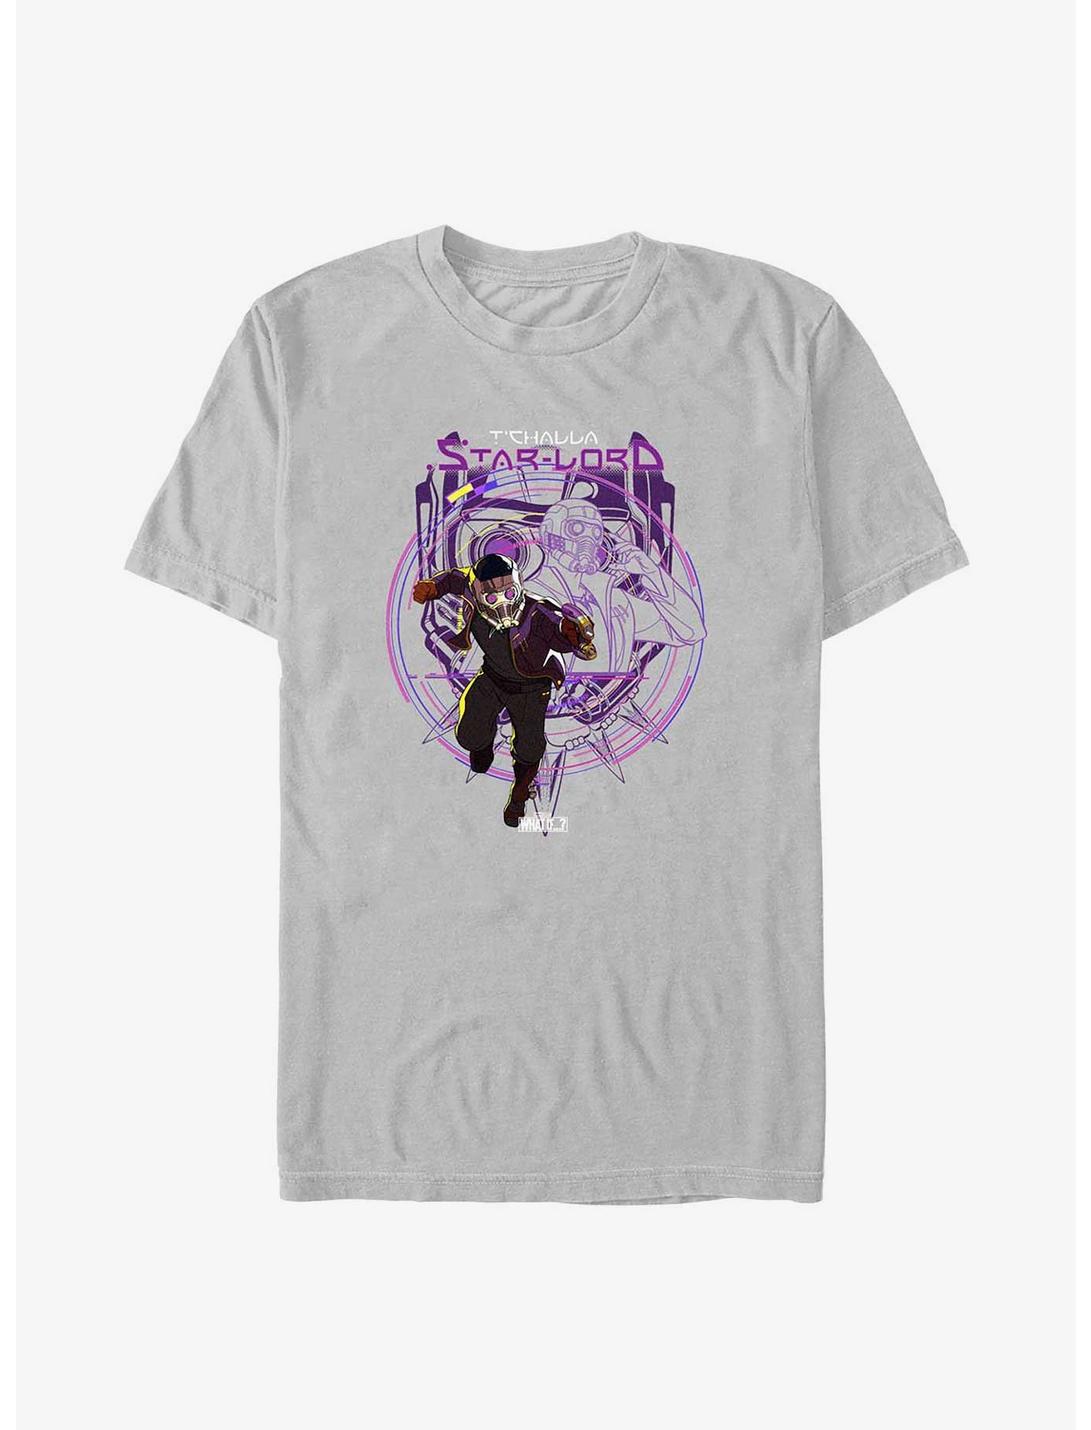 Marvel What If...? T'Challa Star-Lord T-Shirt, SILVER, hi-res